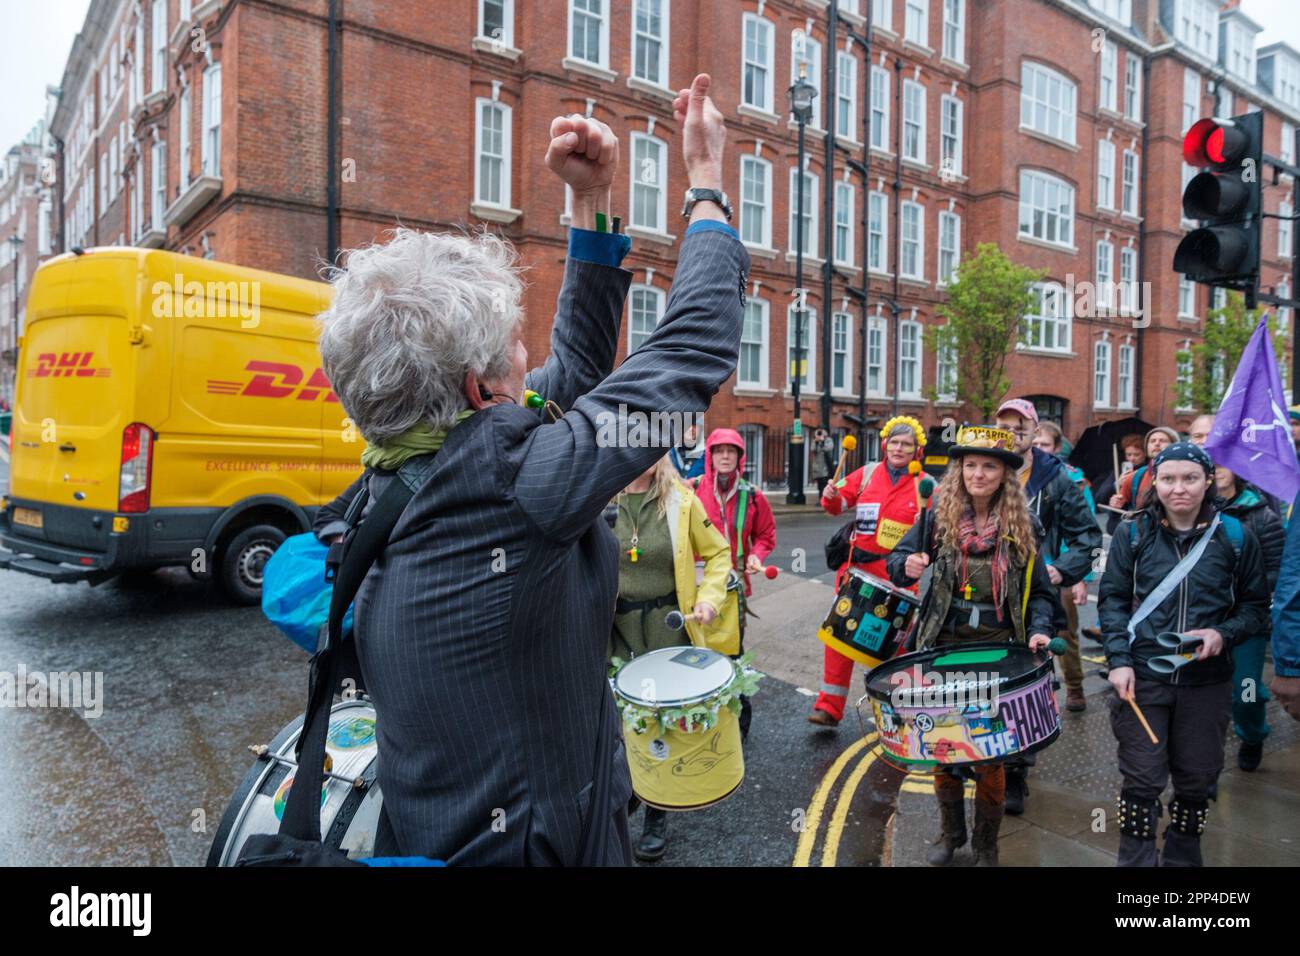 Extinction Rebellion Return for their first large weekend protest doing multiple pickets at various Government Locations in the city Stock Photo